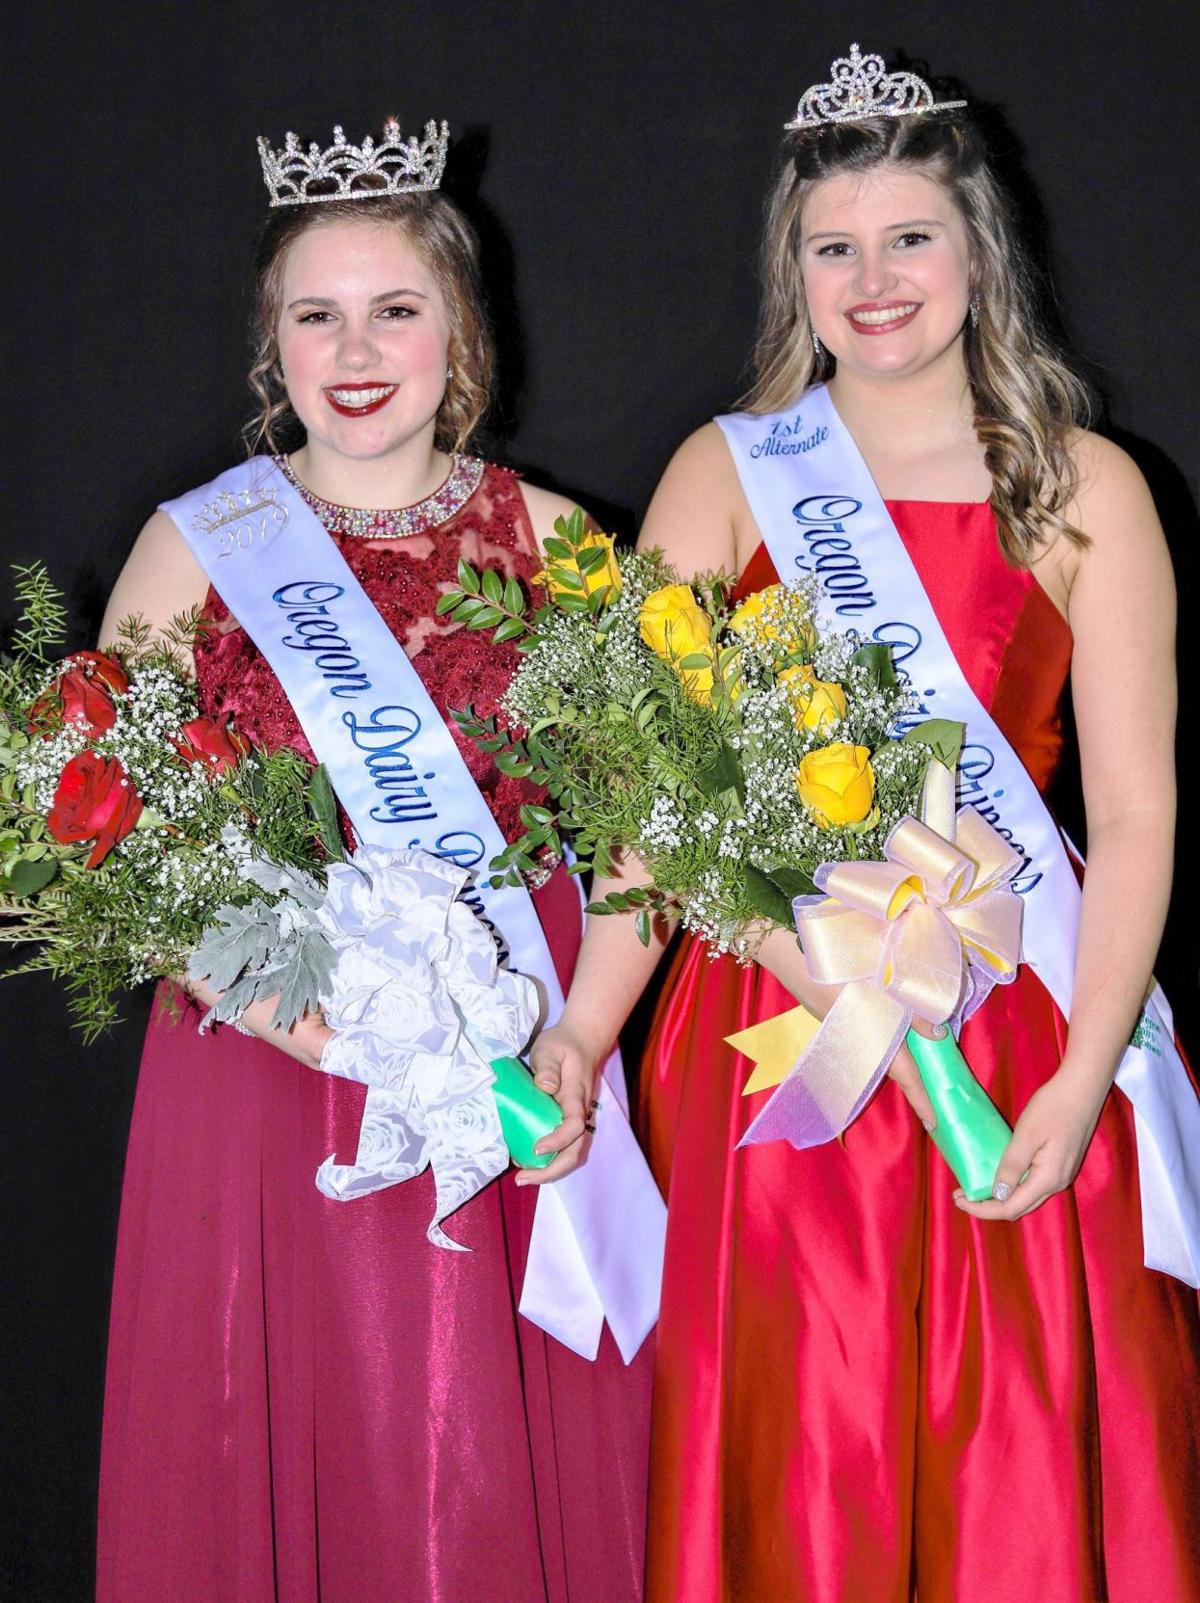 New Oregon Dairy Princess Emily Henry is from Scio | News ...